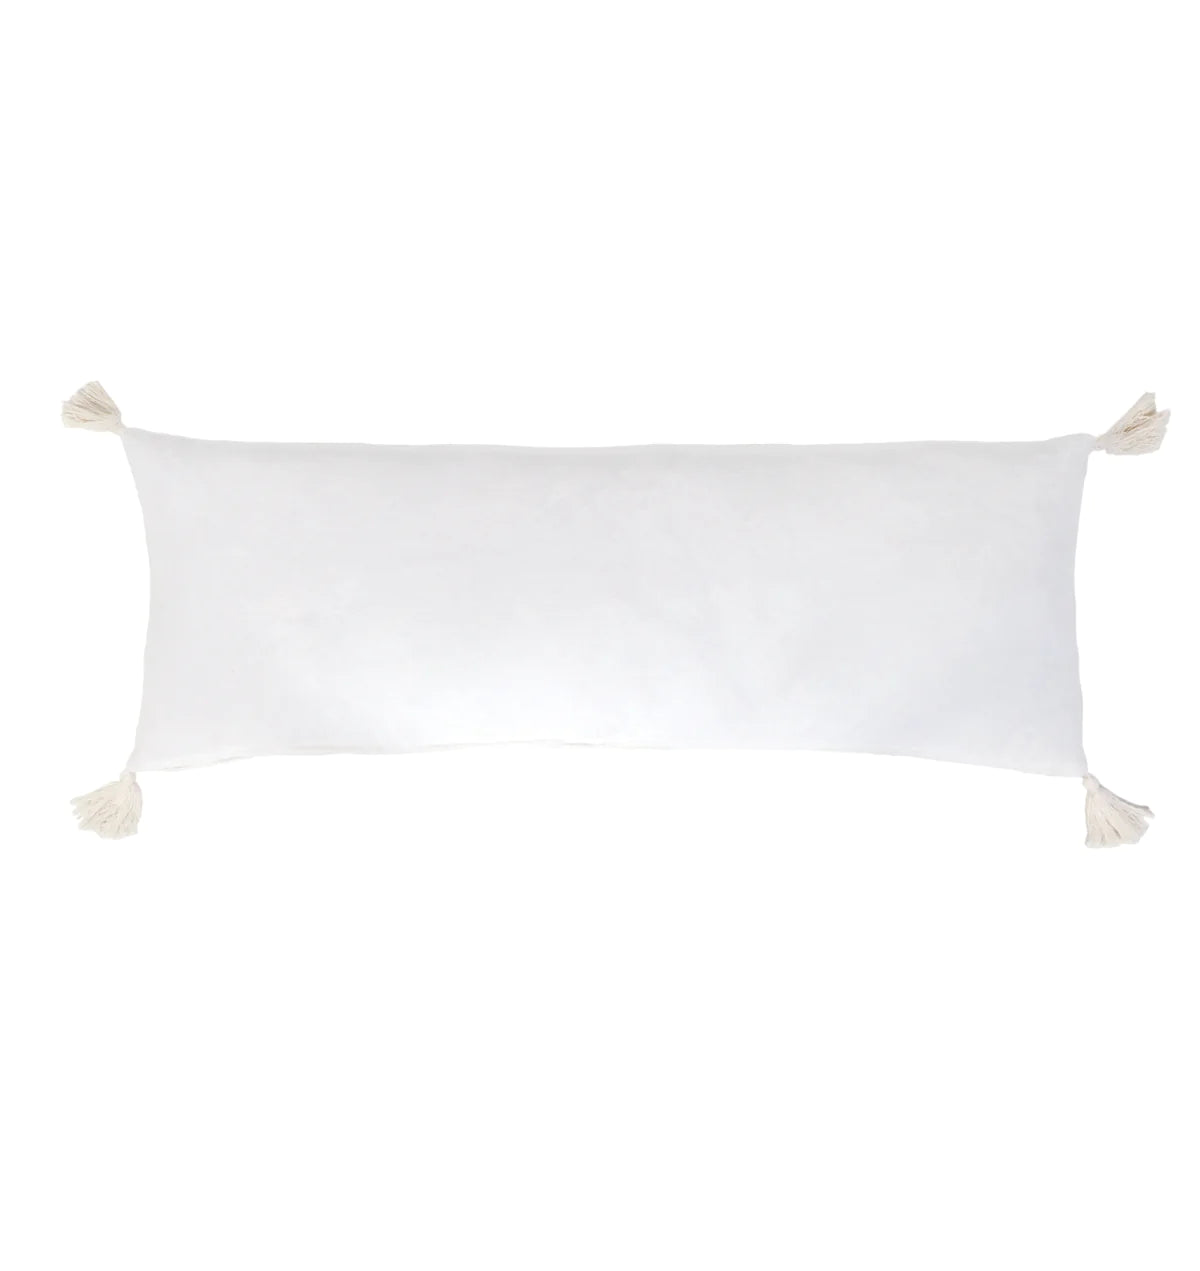 Bianca 14"x40" Pillow with Insert - White Color - Pom pom At Home